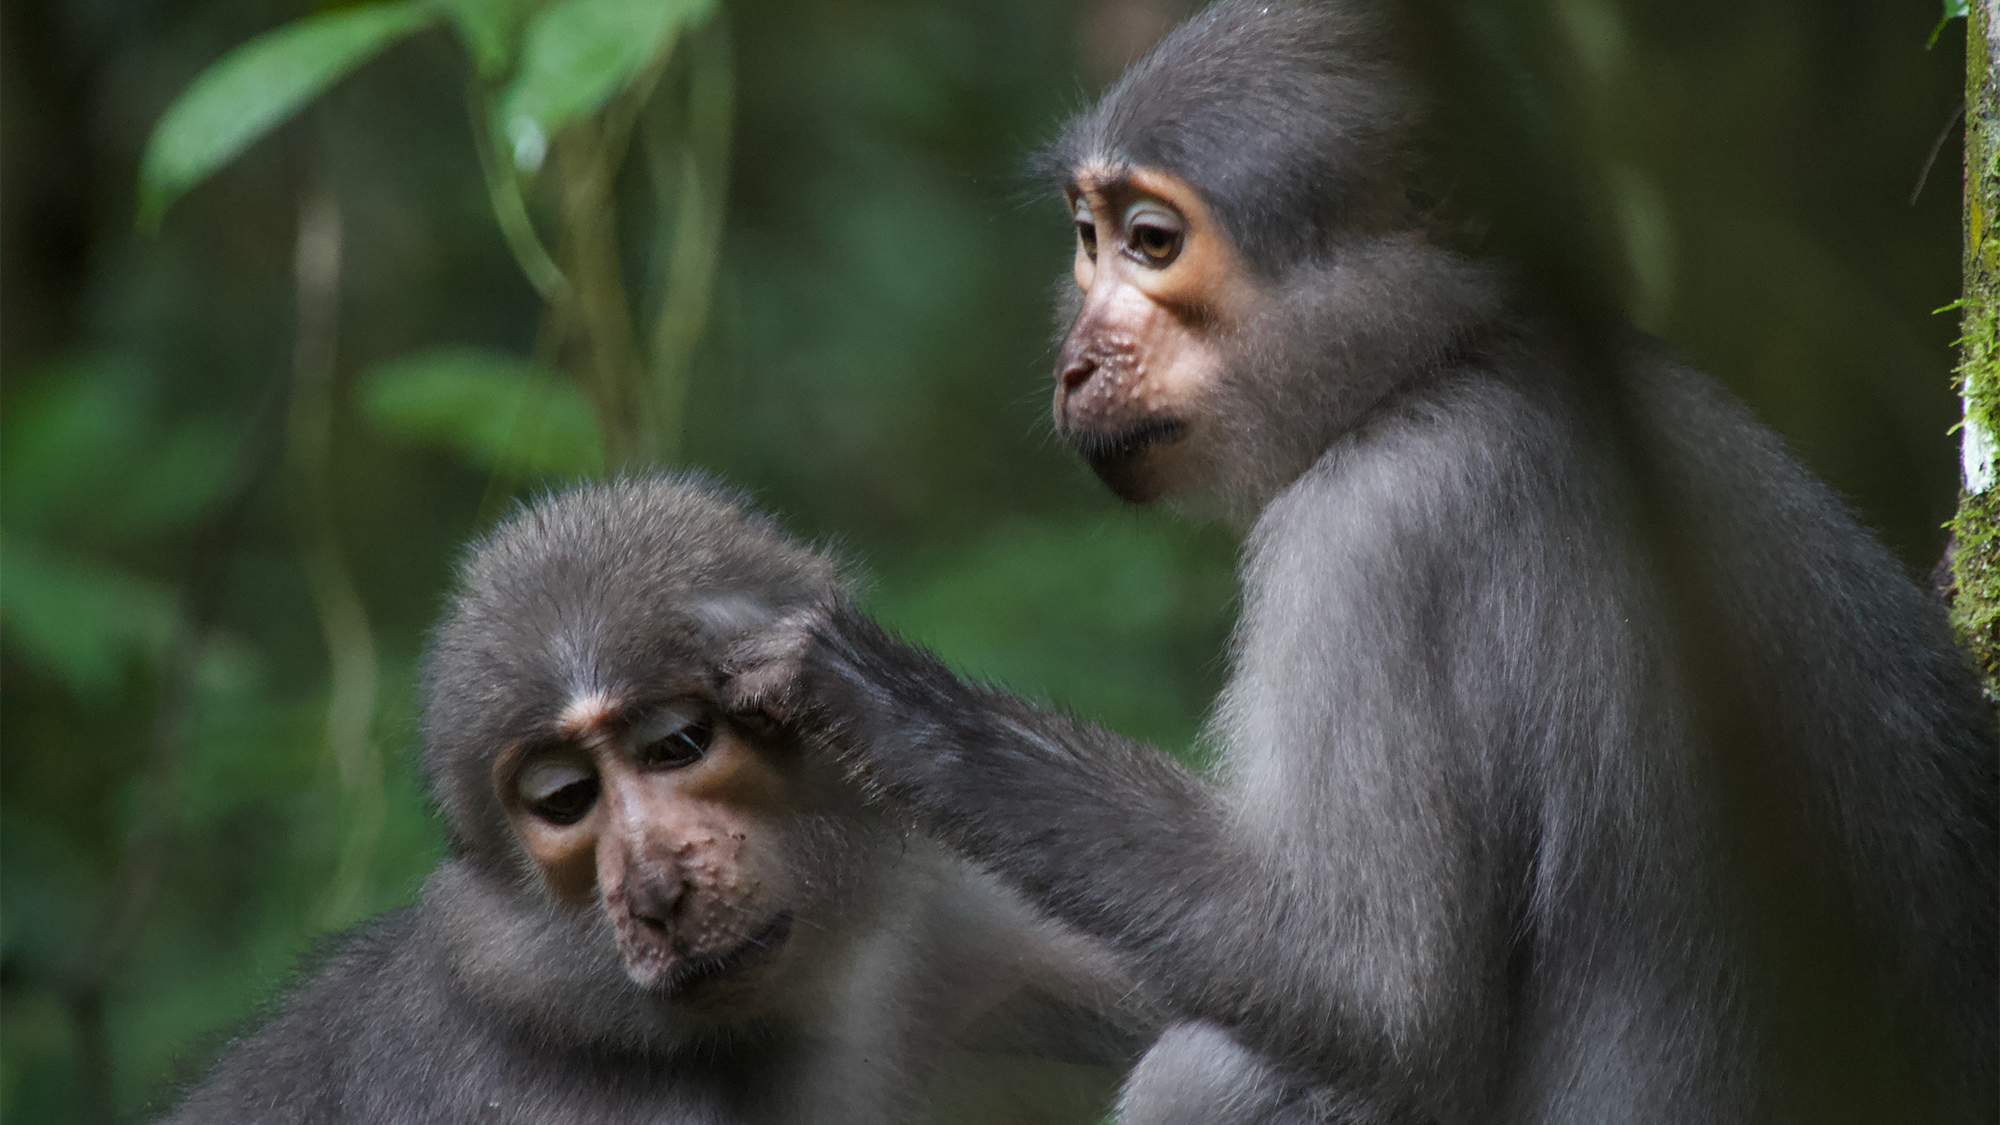 Two monkeys sitting in a forest. Dartmouth researchers report that apes and early humans evolved more flexible shoulders and elbows than monkeys to safely get out of trees. For early humans, these versatile appendages would have been essential for gathering food and deploying tools for hunting and defense.